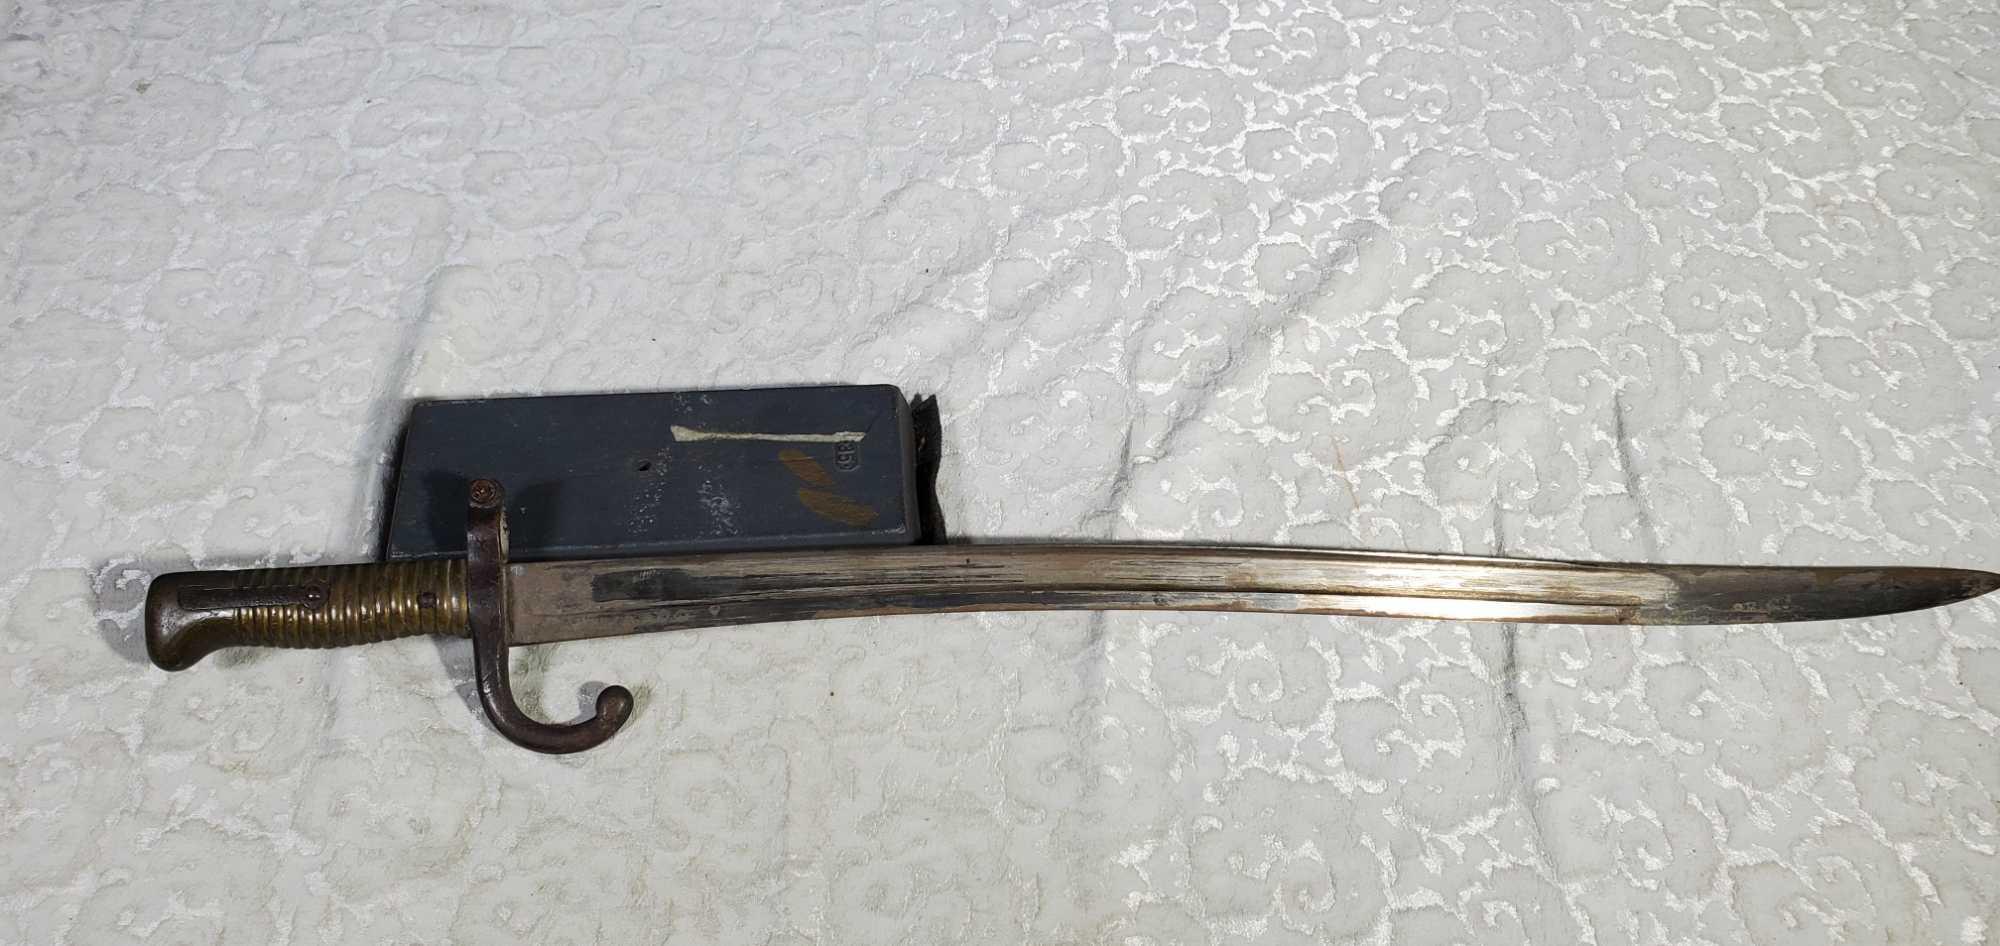 1868 French Bayonet Recurve Blade For Chassepot Rifle